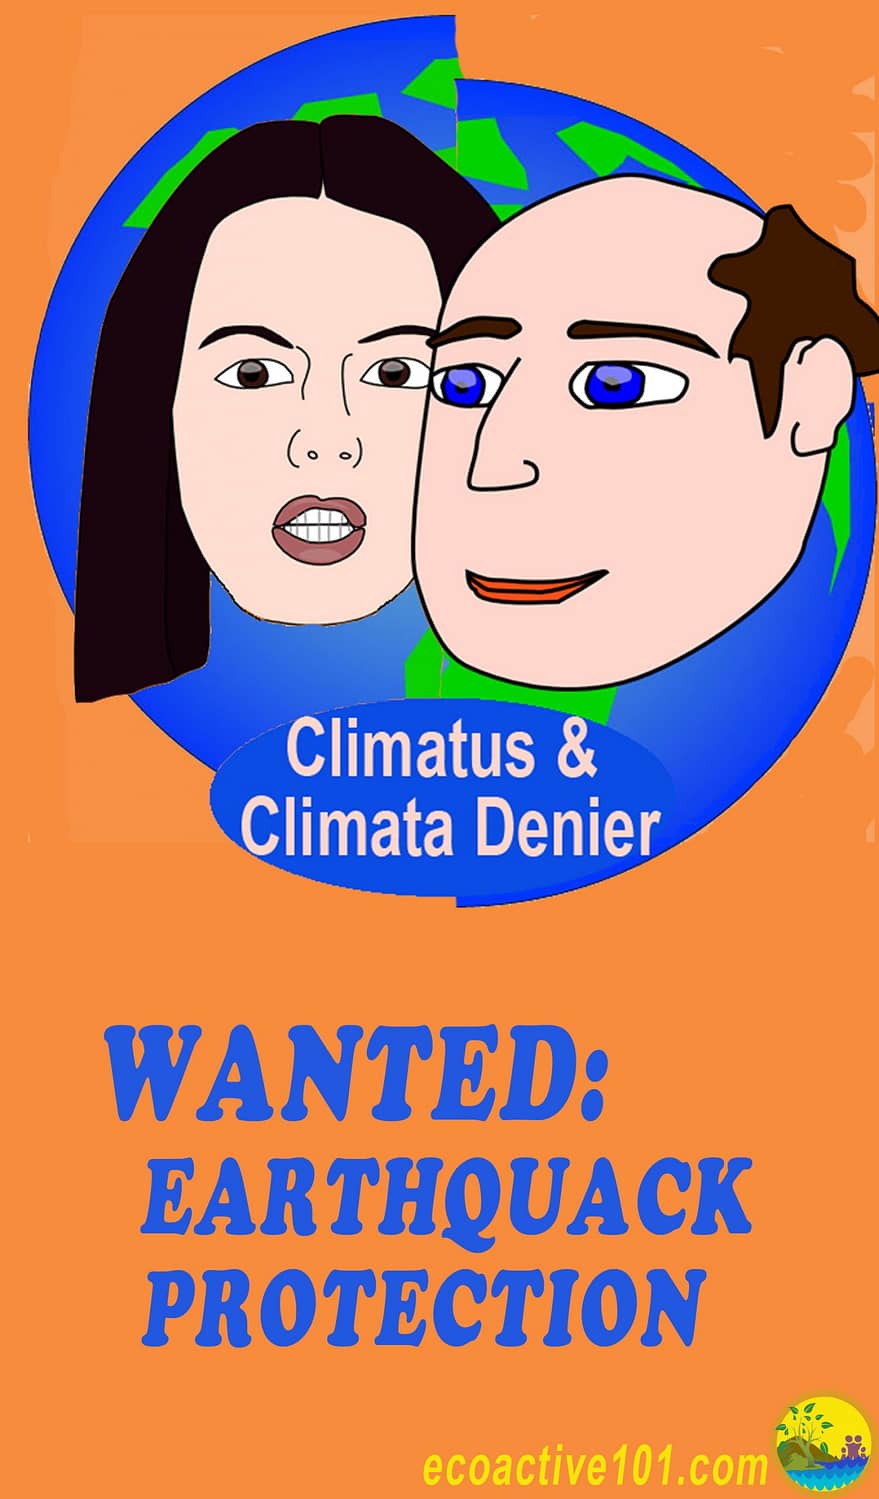 Faces of 2 climate change deniers superimposed over an earth split down the middle, as by a fault, with the words "Wanted: Earthquack Protection."